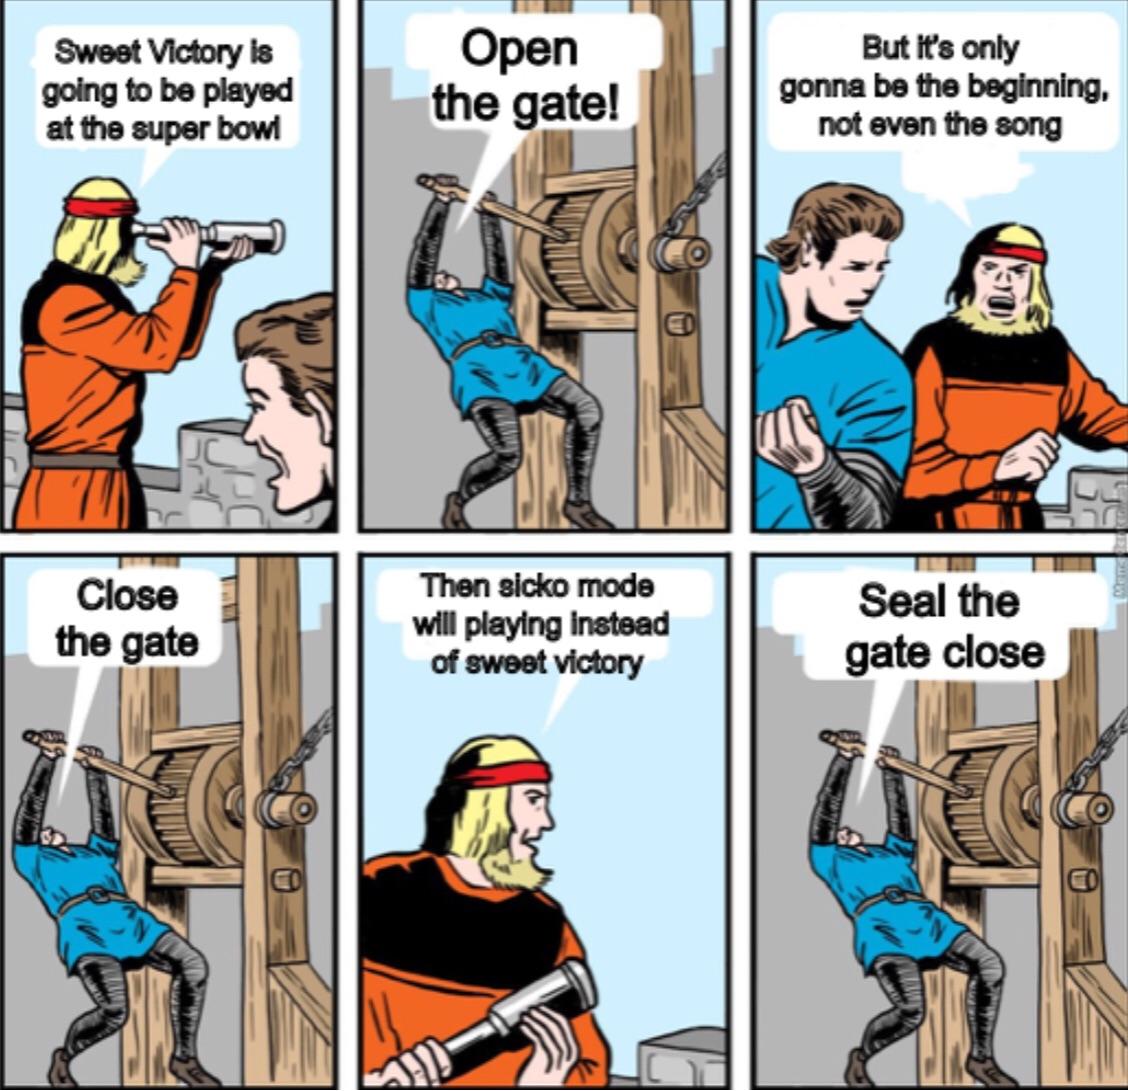 memes - open the gate female - Sweet Victory is going to be played at the super bowl Open the gate! But it's only gonna be the beginning, not even the song Close the gate Then sicko mode will playing instead of sweet victory Seal the gate close